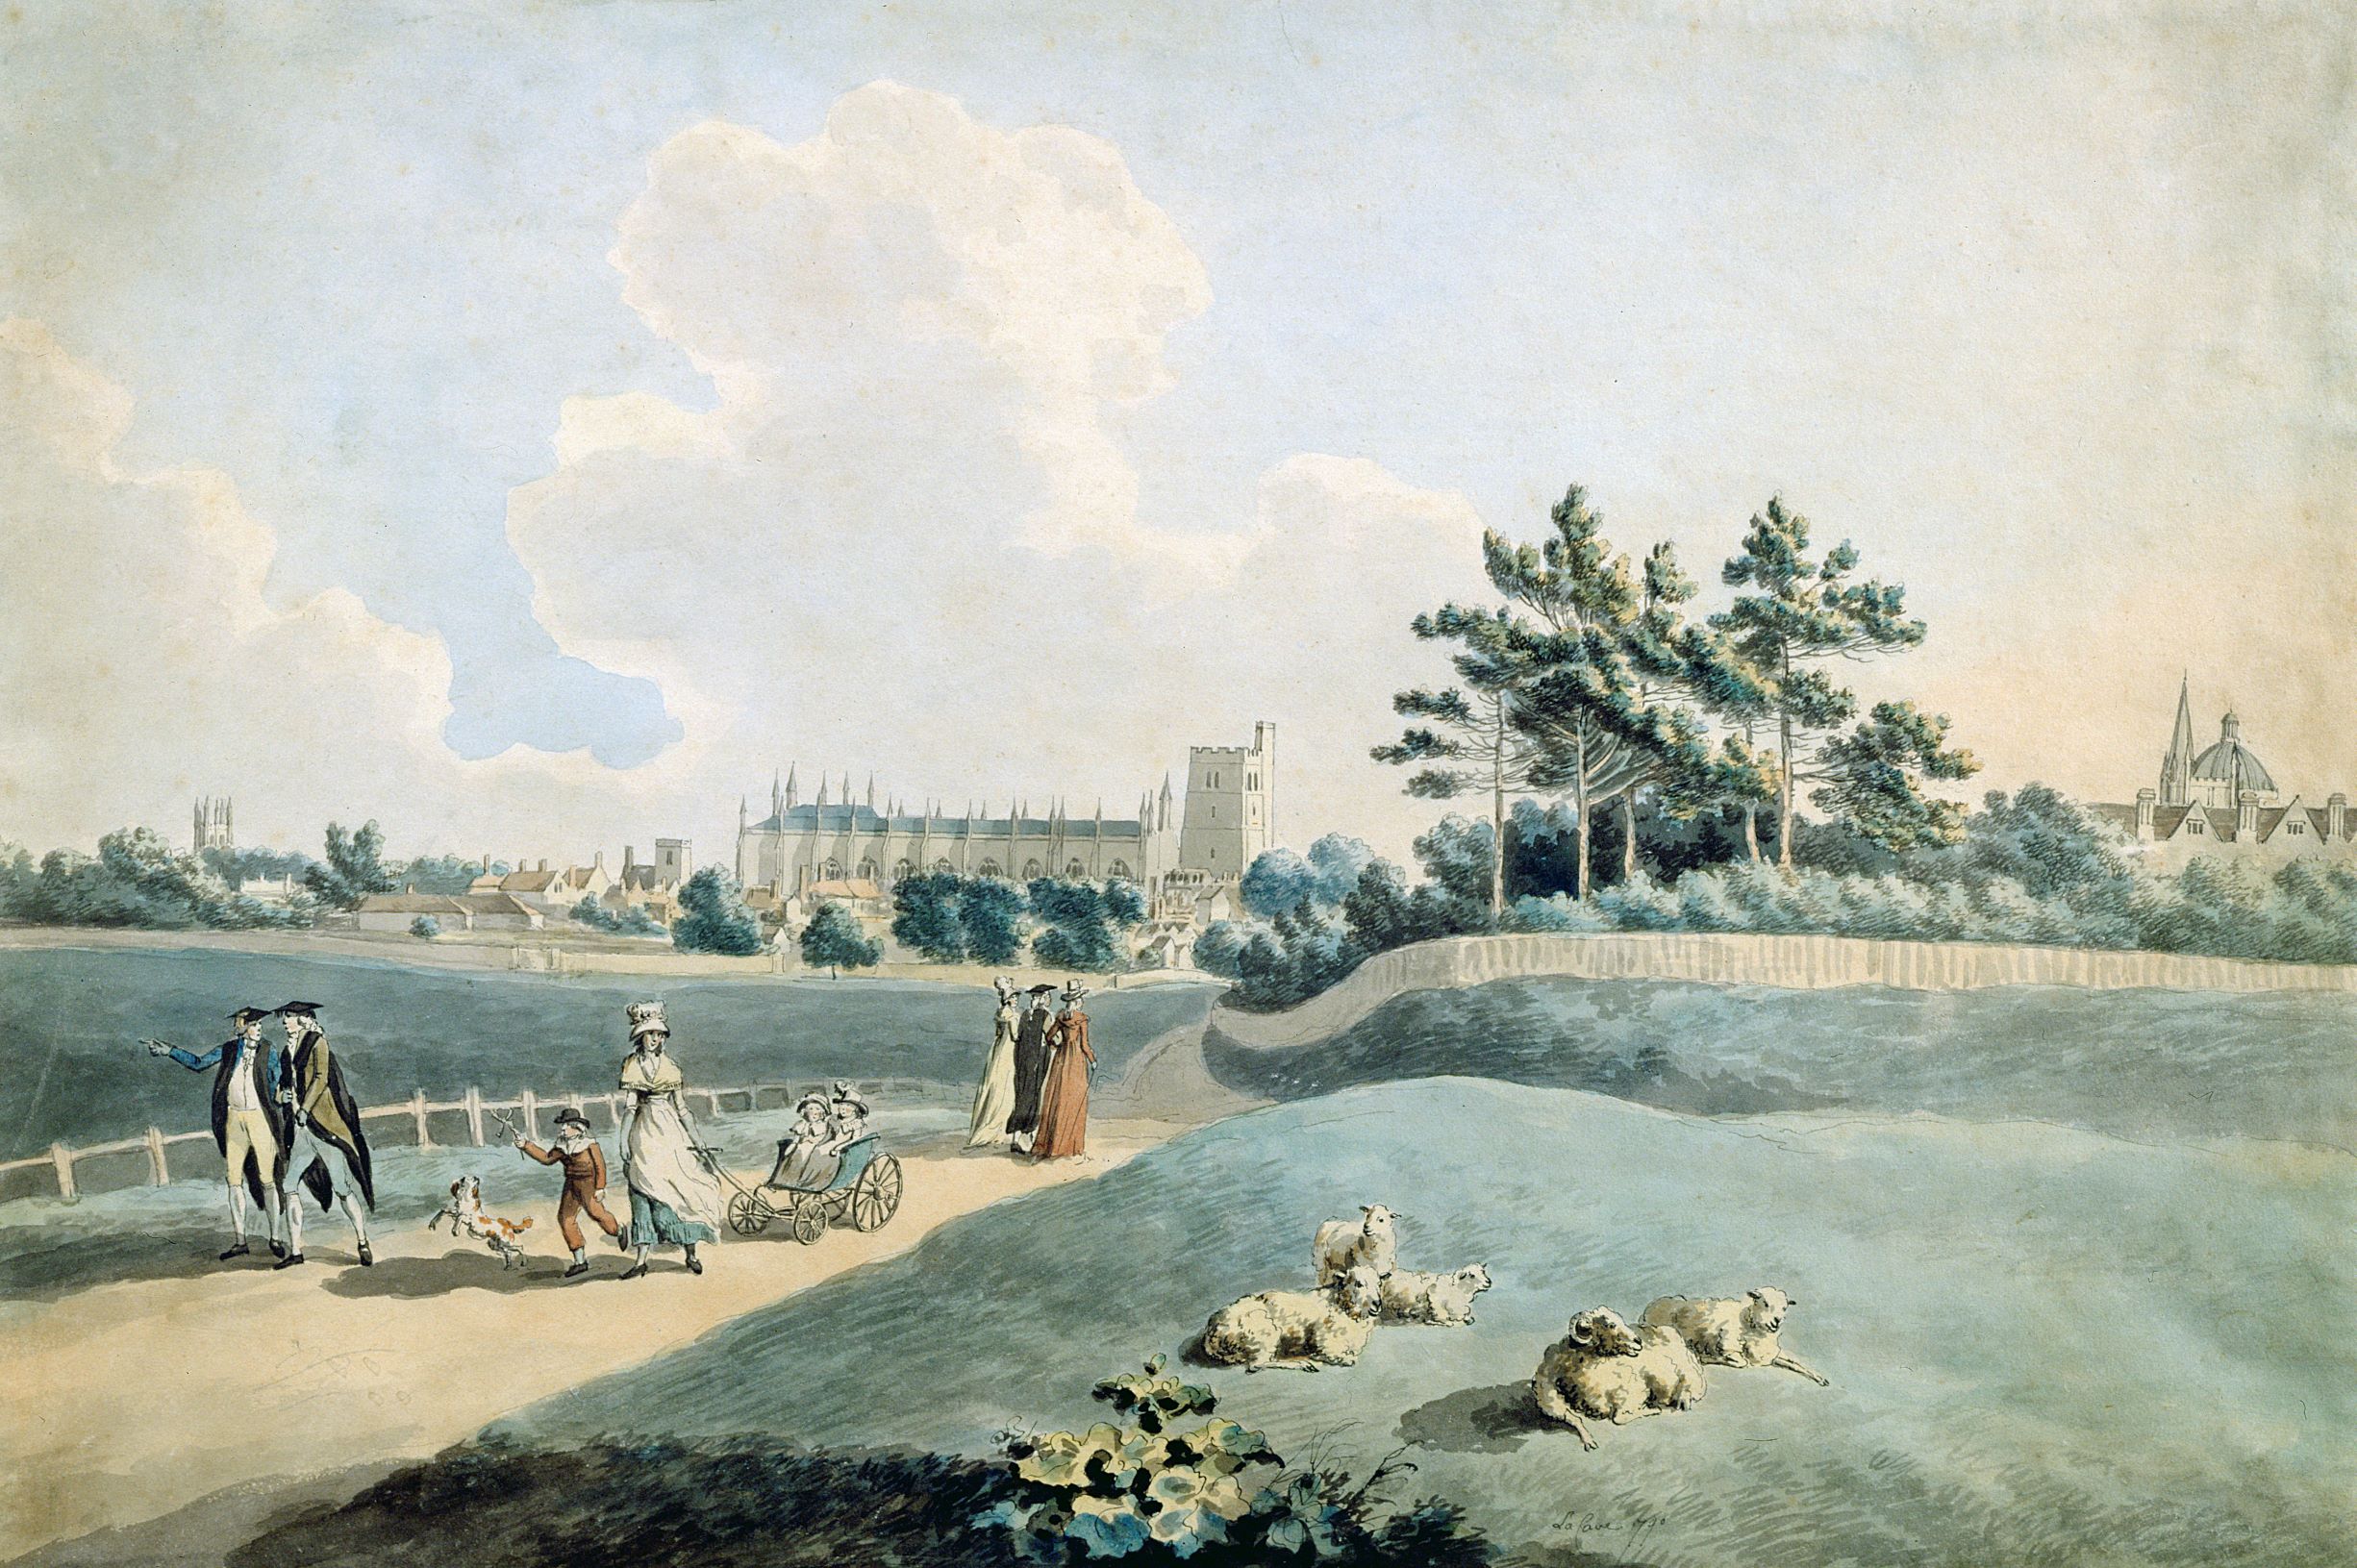 New College from the Parks; artist: Peter Le Cave; medium: Watercolour; date: c.1790.